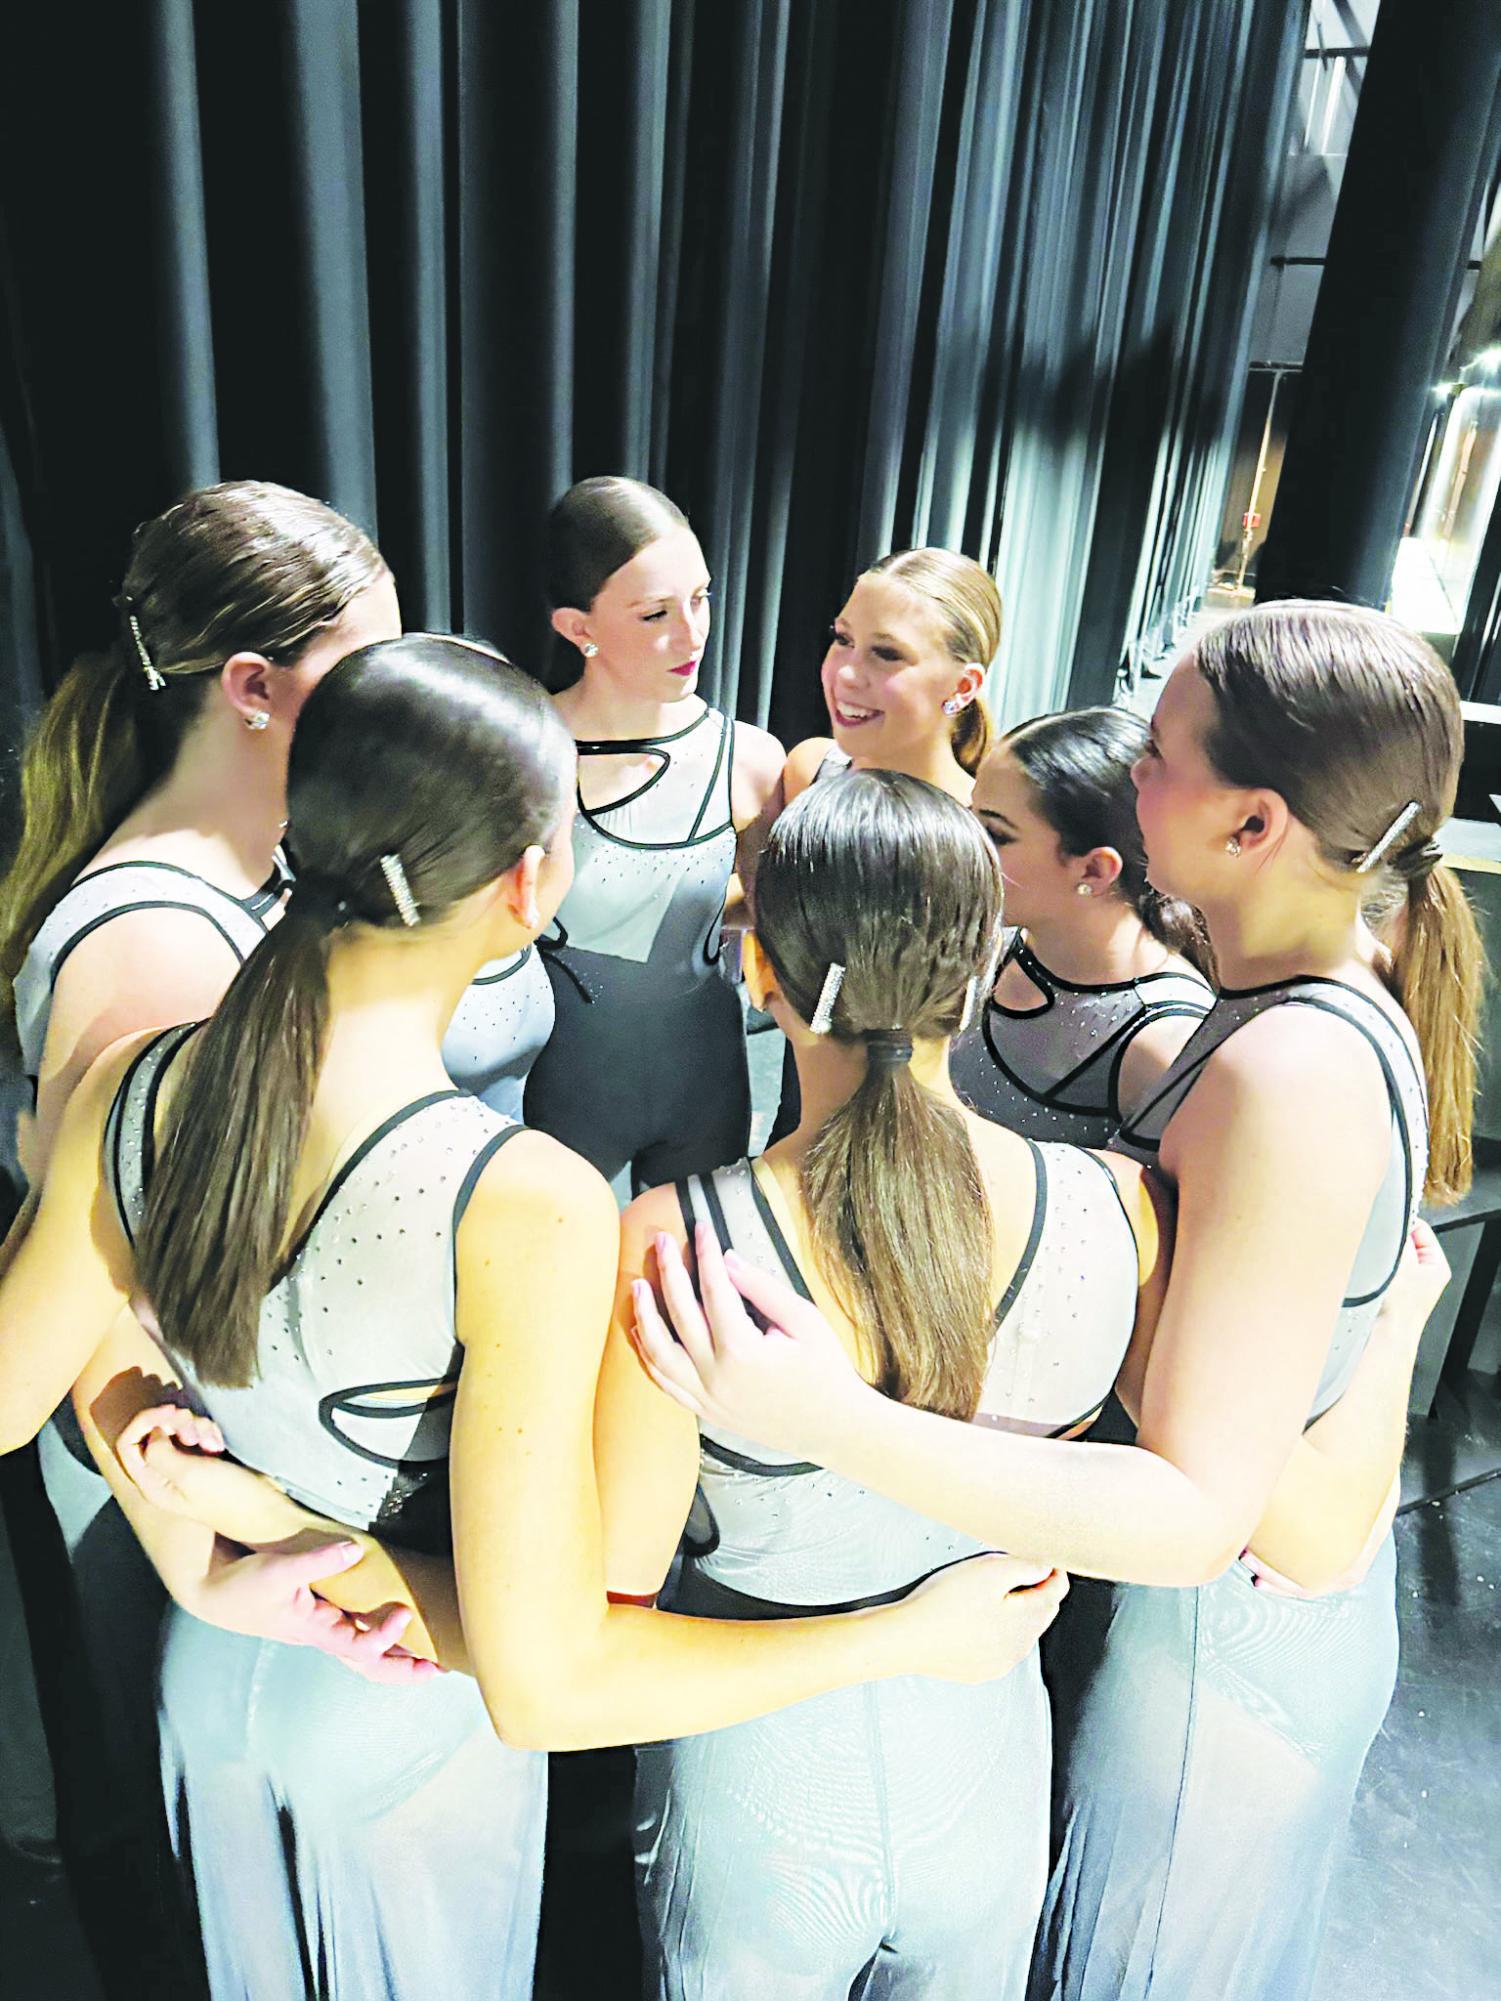 Ava Broll 25 huddles in a pep talk with her competition team prior to doing their contemporary dance Succession on stage. 